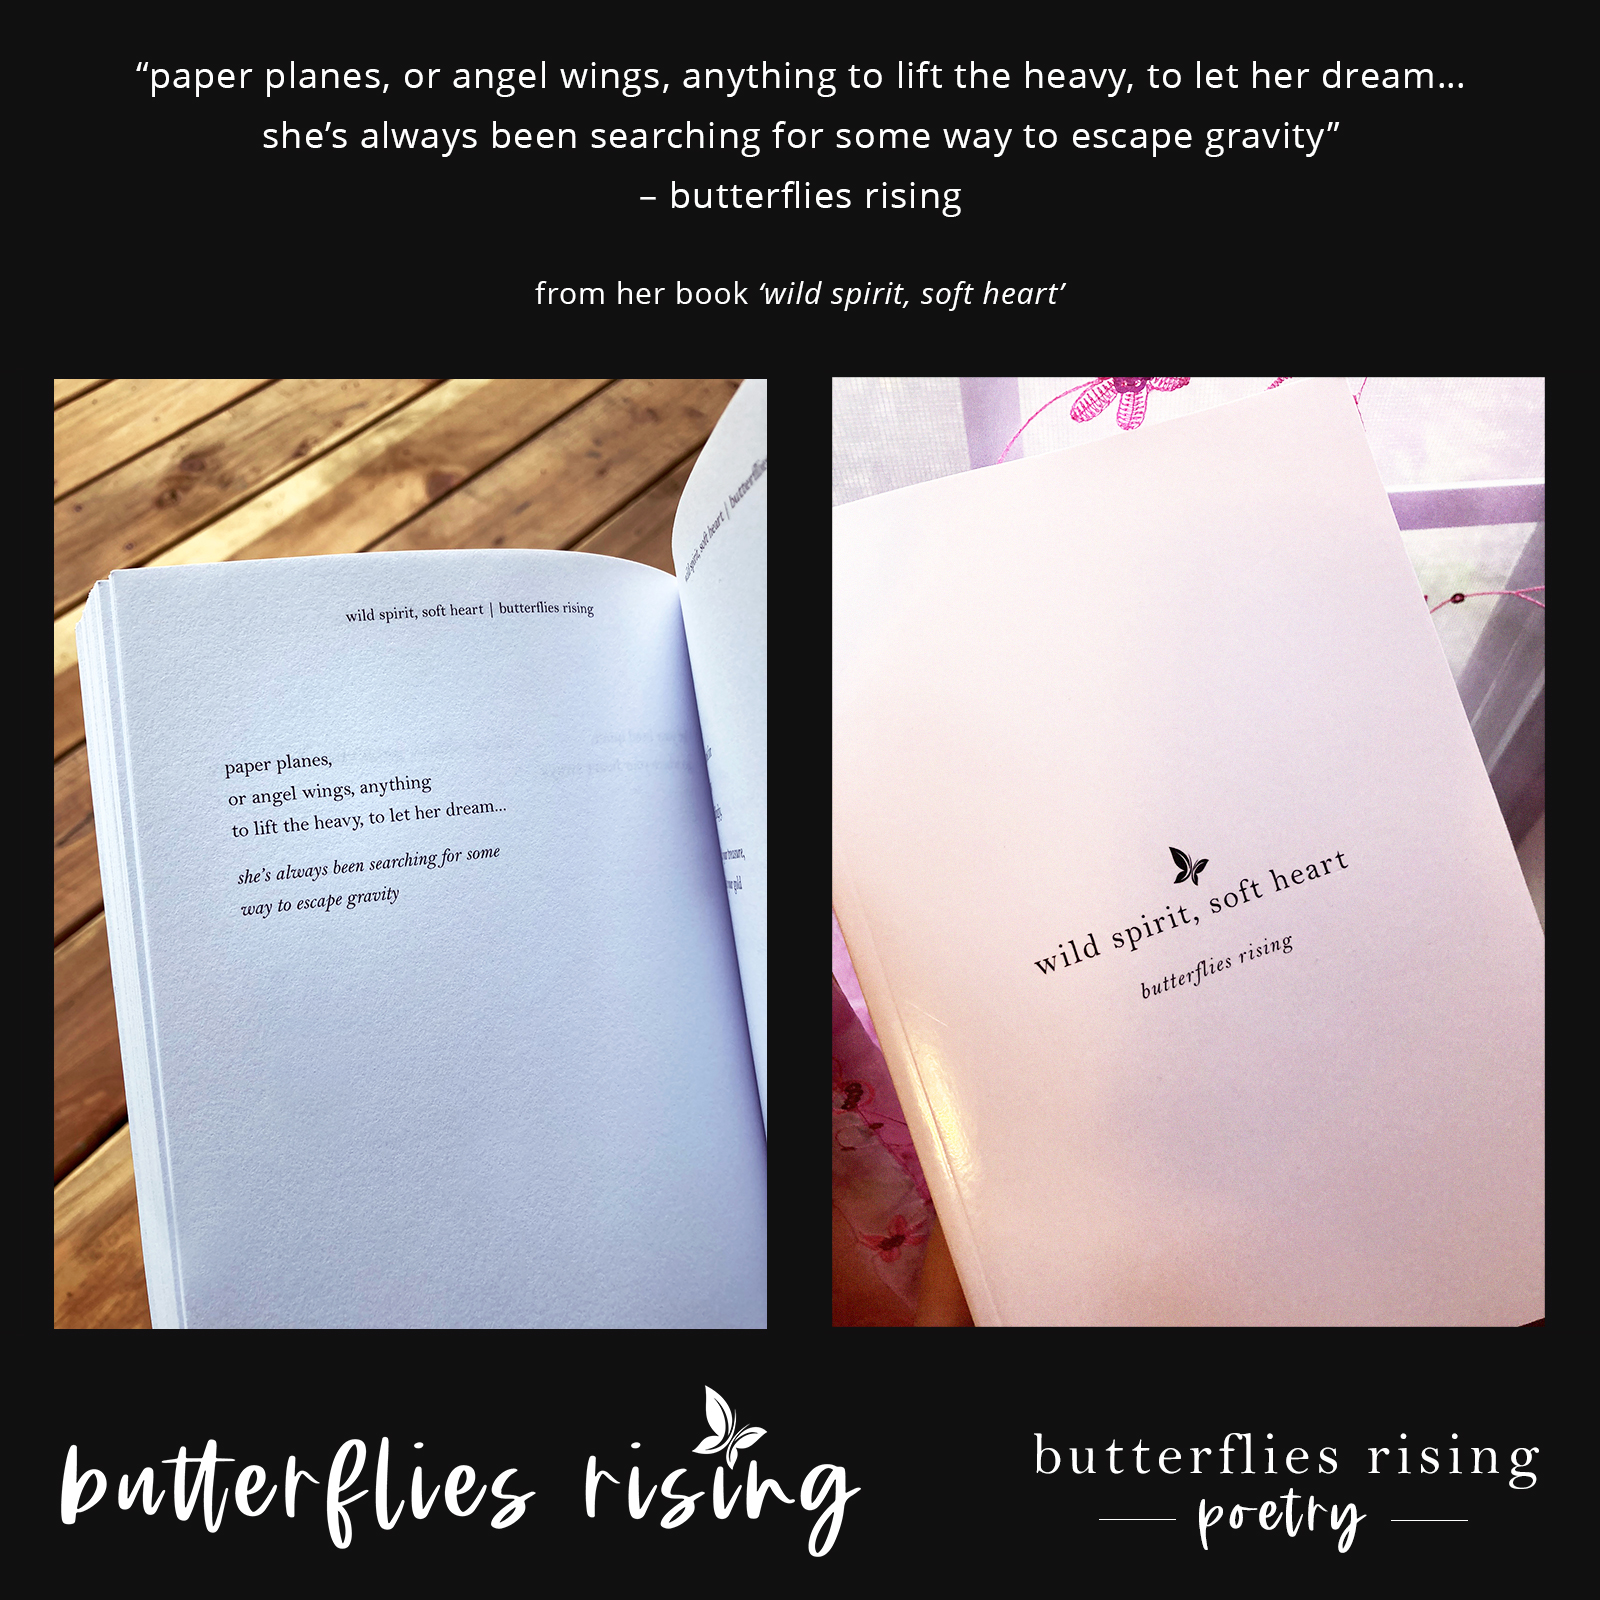 paper planes, or angel wings, anything to lift the heavy, to let her dream - butterflies rising